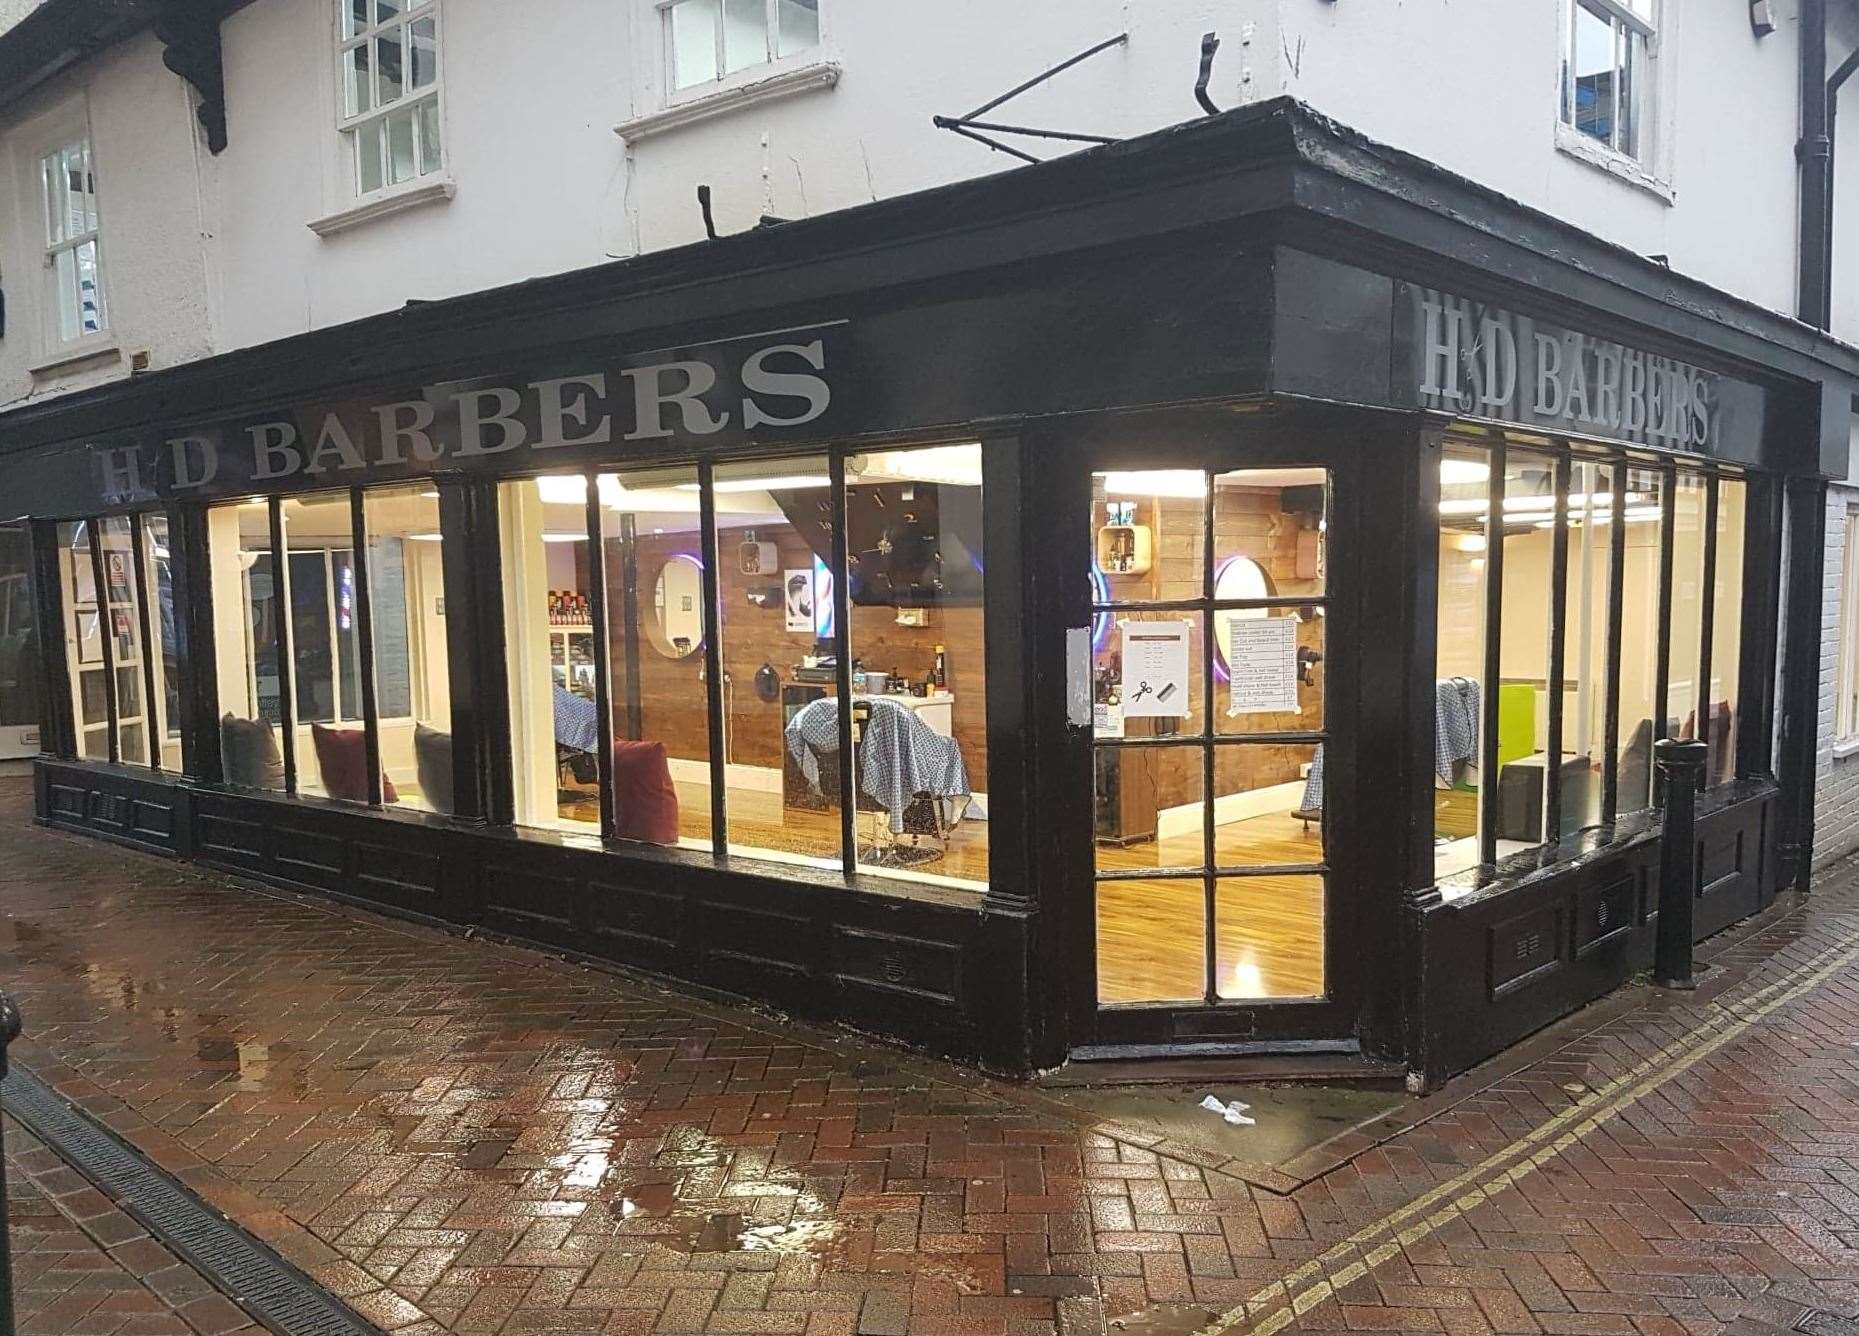 The newly opened HD Barbers is the town's 25th hairdresser